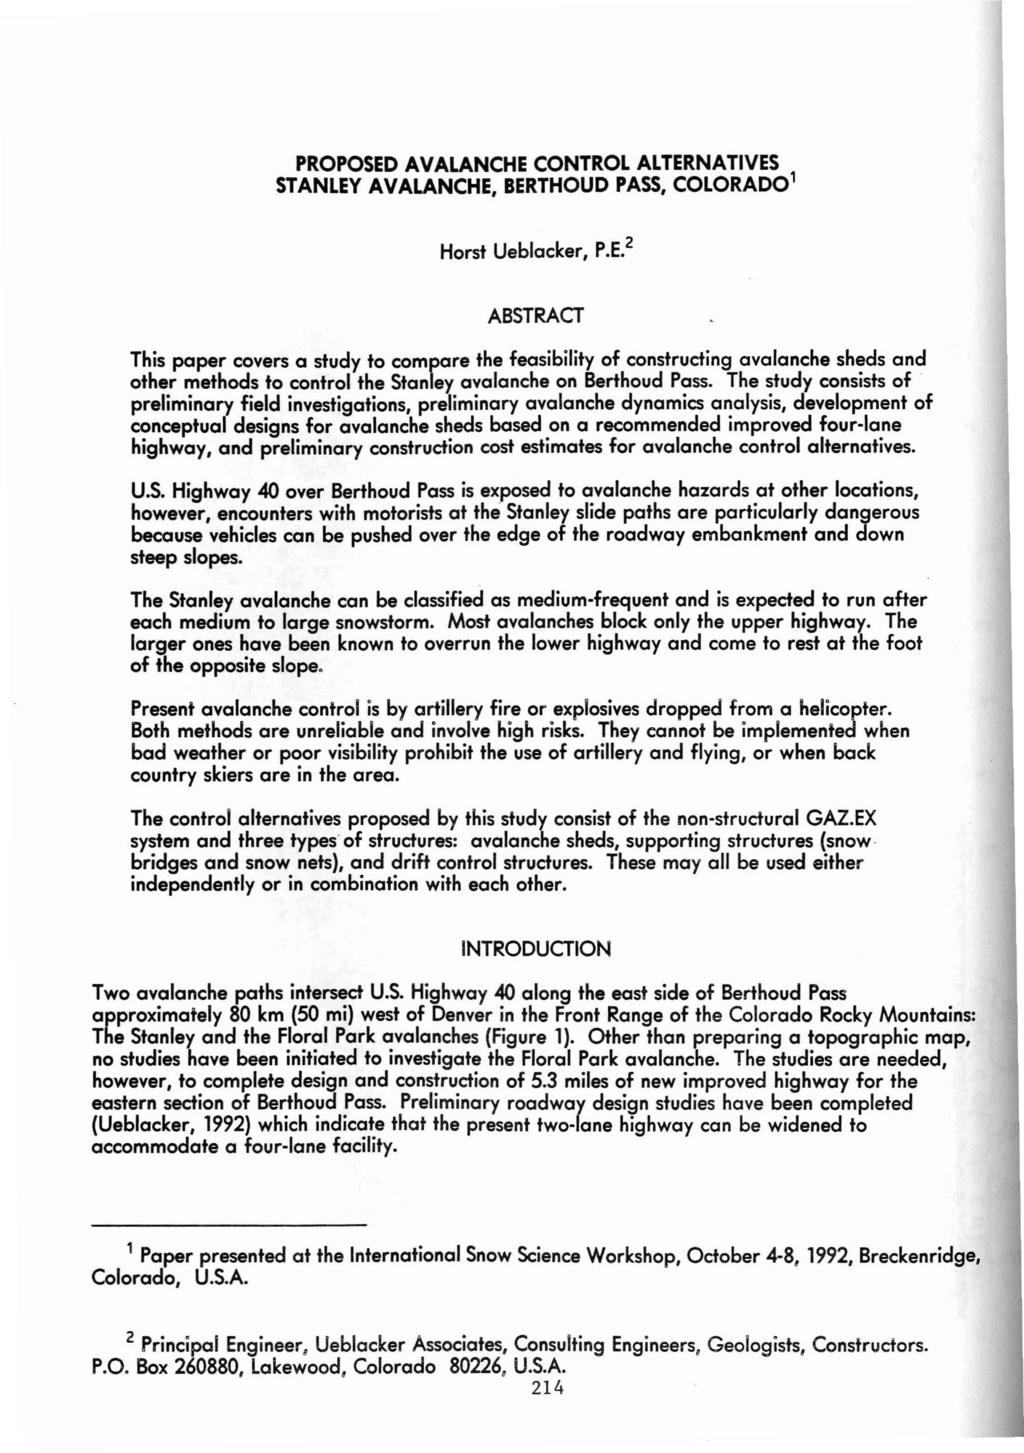 PROPOSED AVALACHE COTROL ALTERATIVES STALEY AVALACHE, BERTHOUD PASS, COLORADO' Horst Ueblacleer, P.E. 2 ABSTRACT This paper covers a study to compare the feasibility of constructing avalanche sheds and other methods to control the Stanley avalanche on Berthoud Pass.